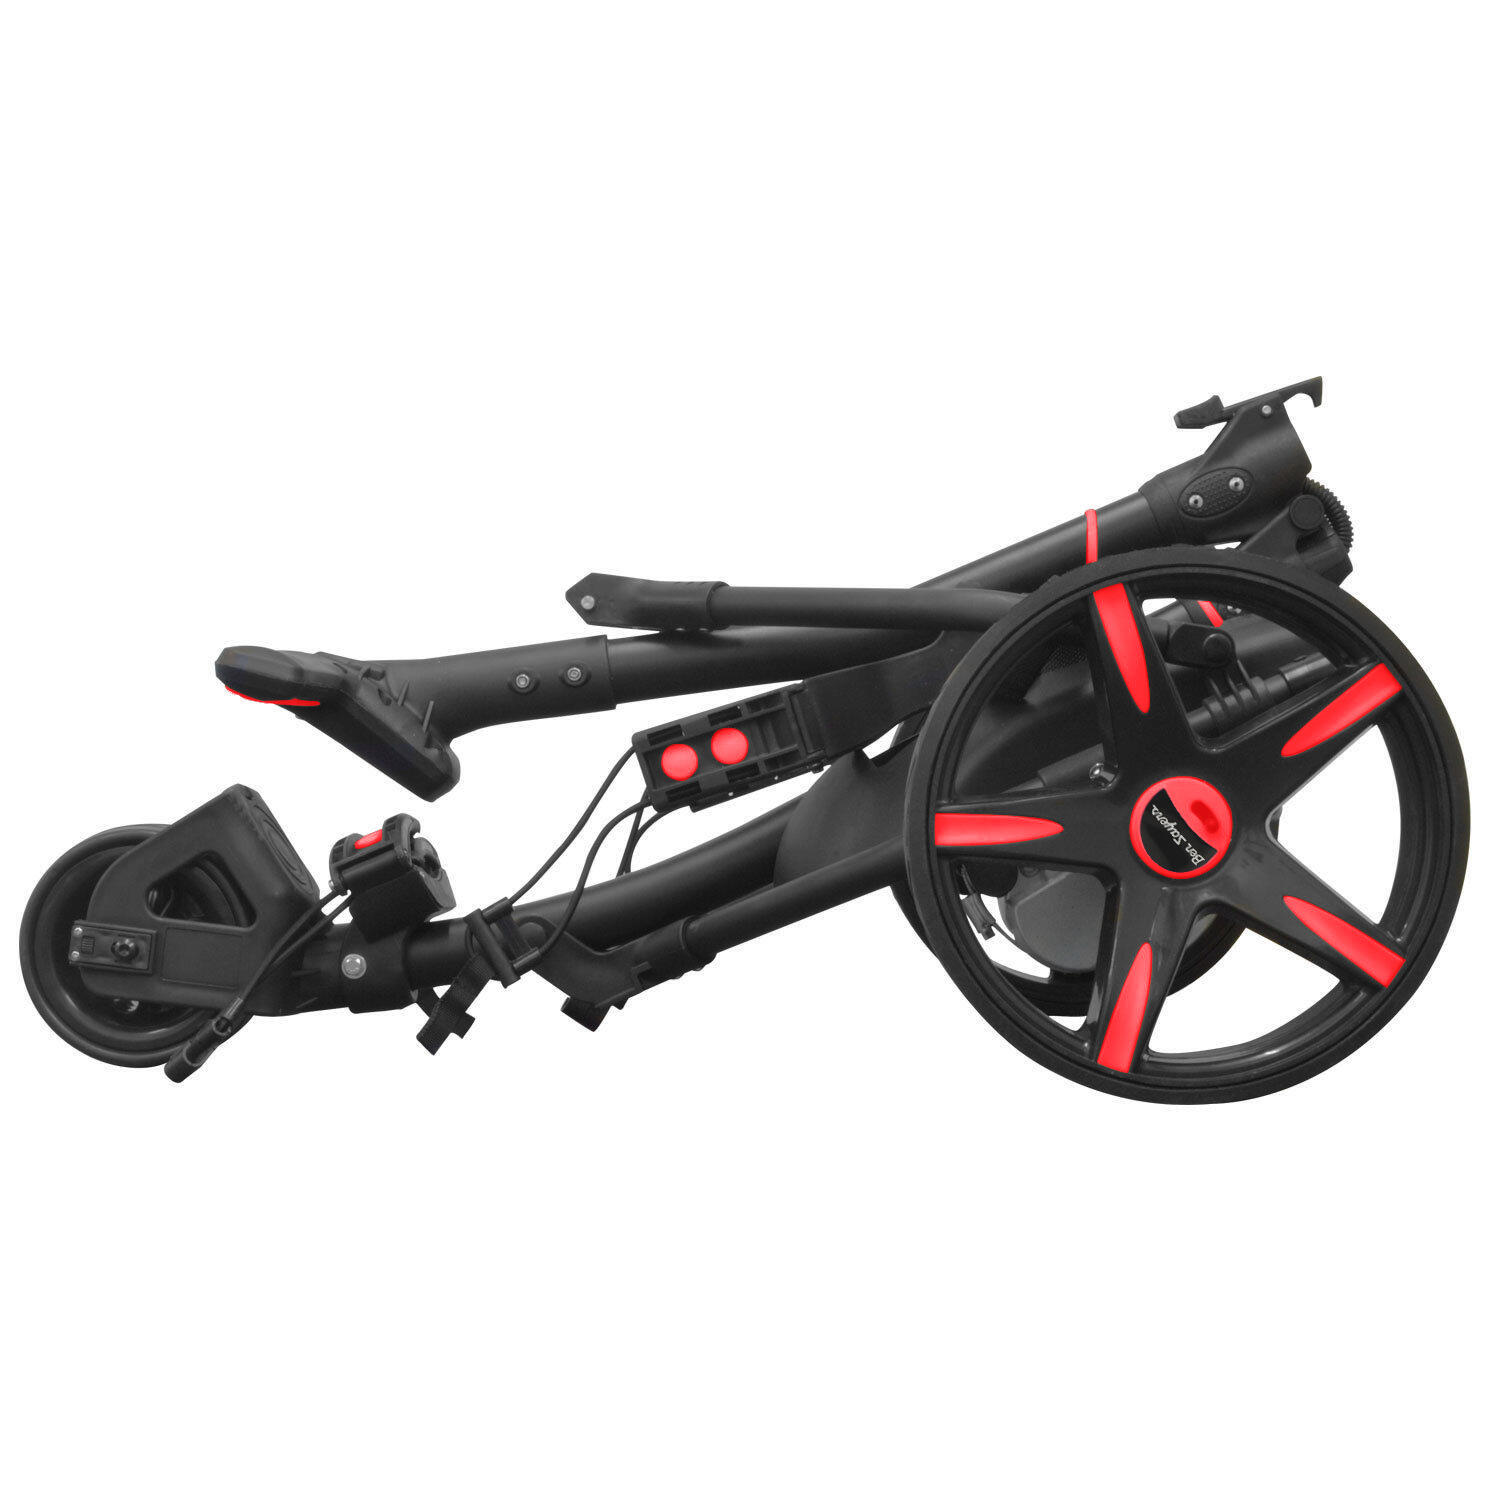 Ben Sayers 18-Hole Lithium Battery Trolley - Black/Red 2/7